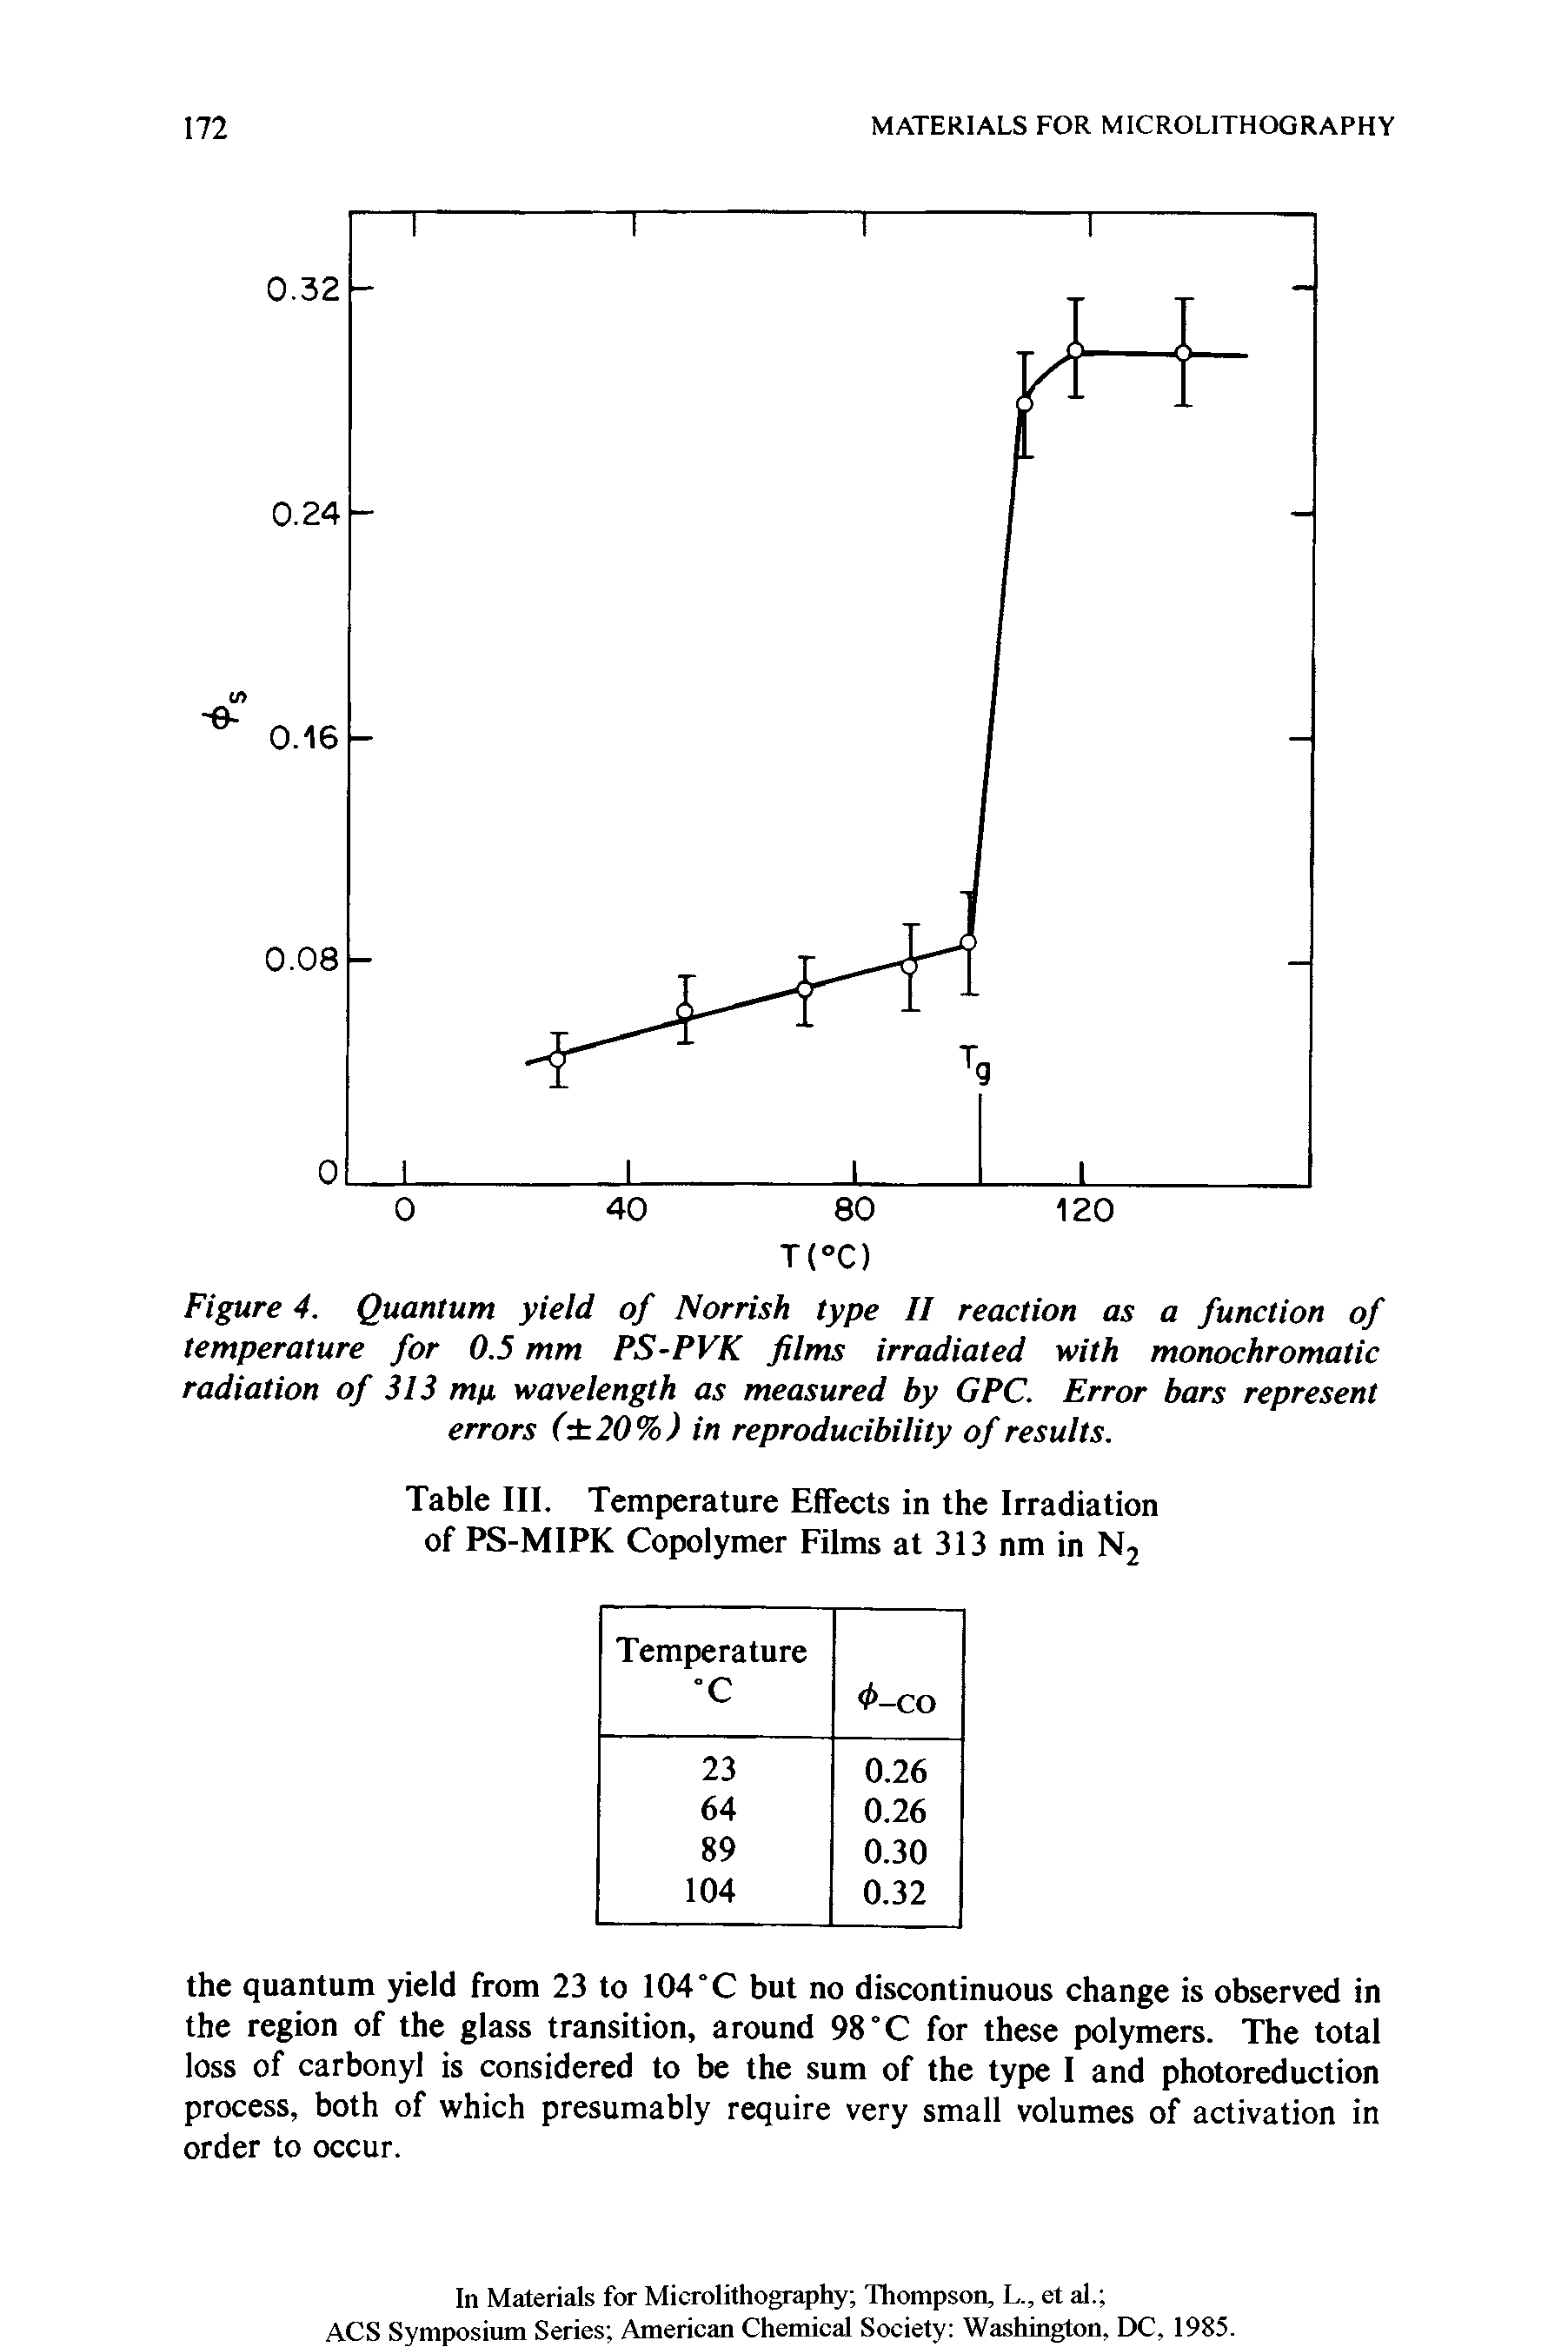 Figure 4. Quantum yield of Norrish type II reaction as a function of temperature for 0.5 mm PS-PVK films irradiated with monochromatic radiation of 313 mu wavelength as measured by GPC. Error bars represent errors ( 20%) in reproducibility of results.